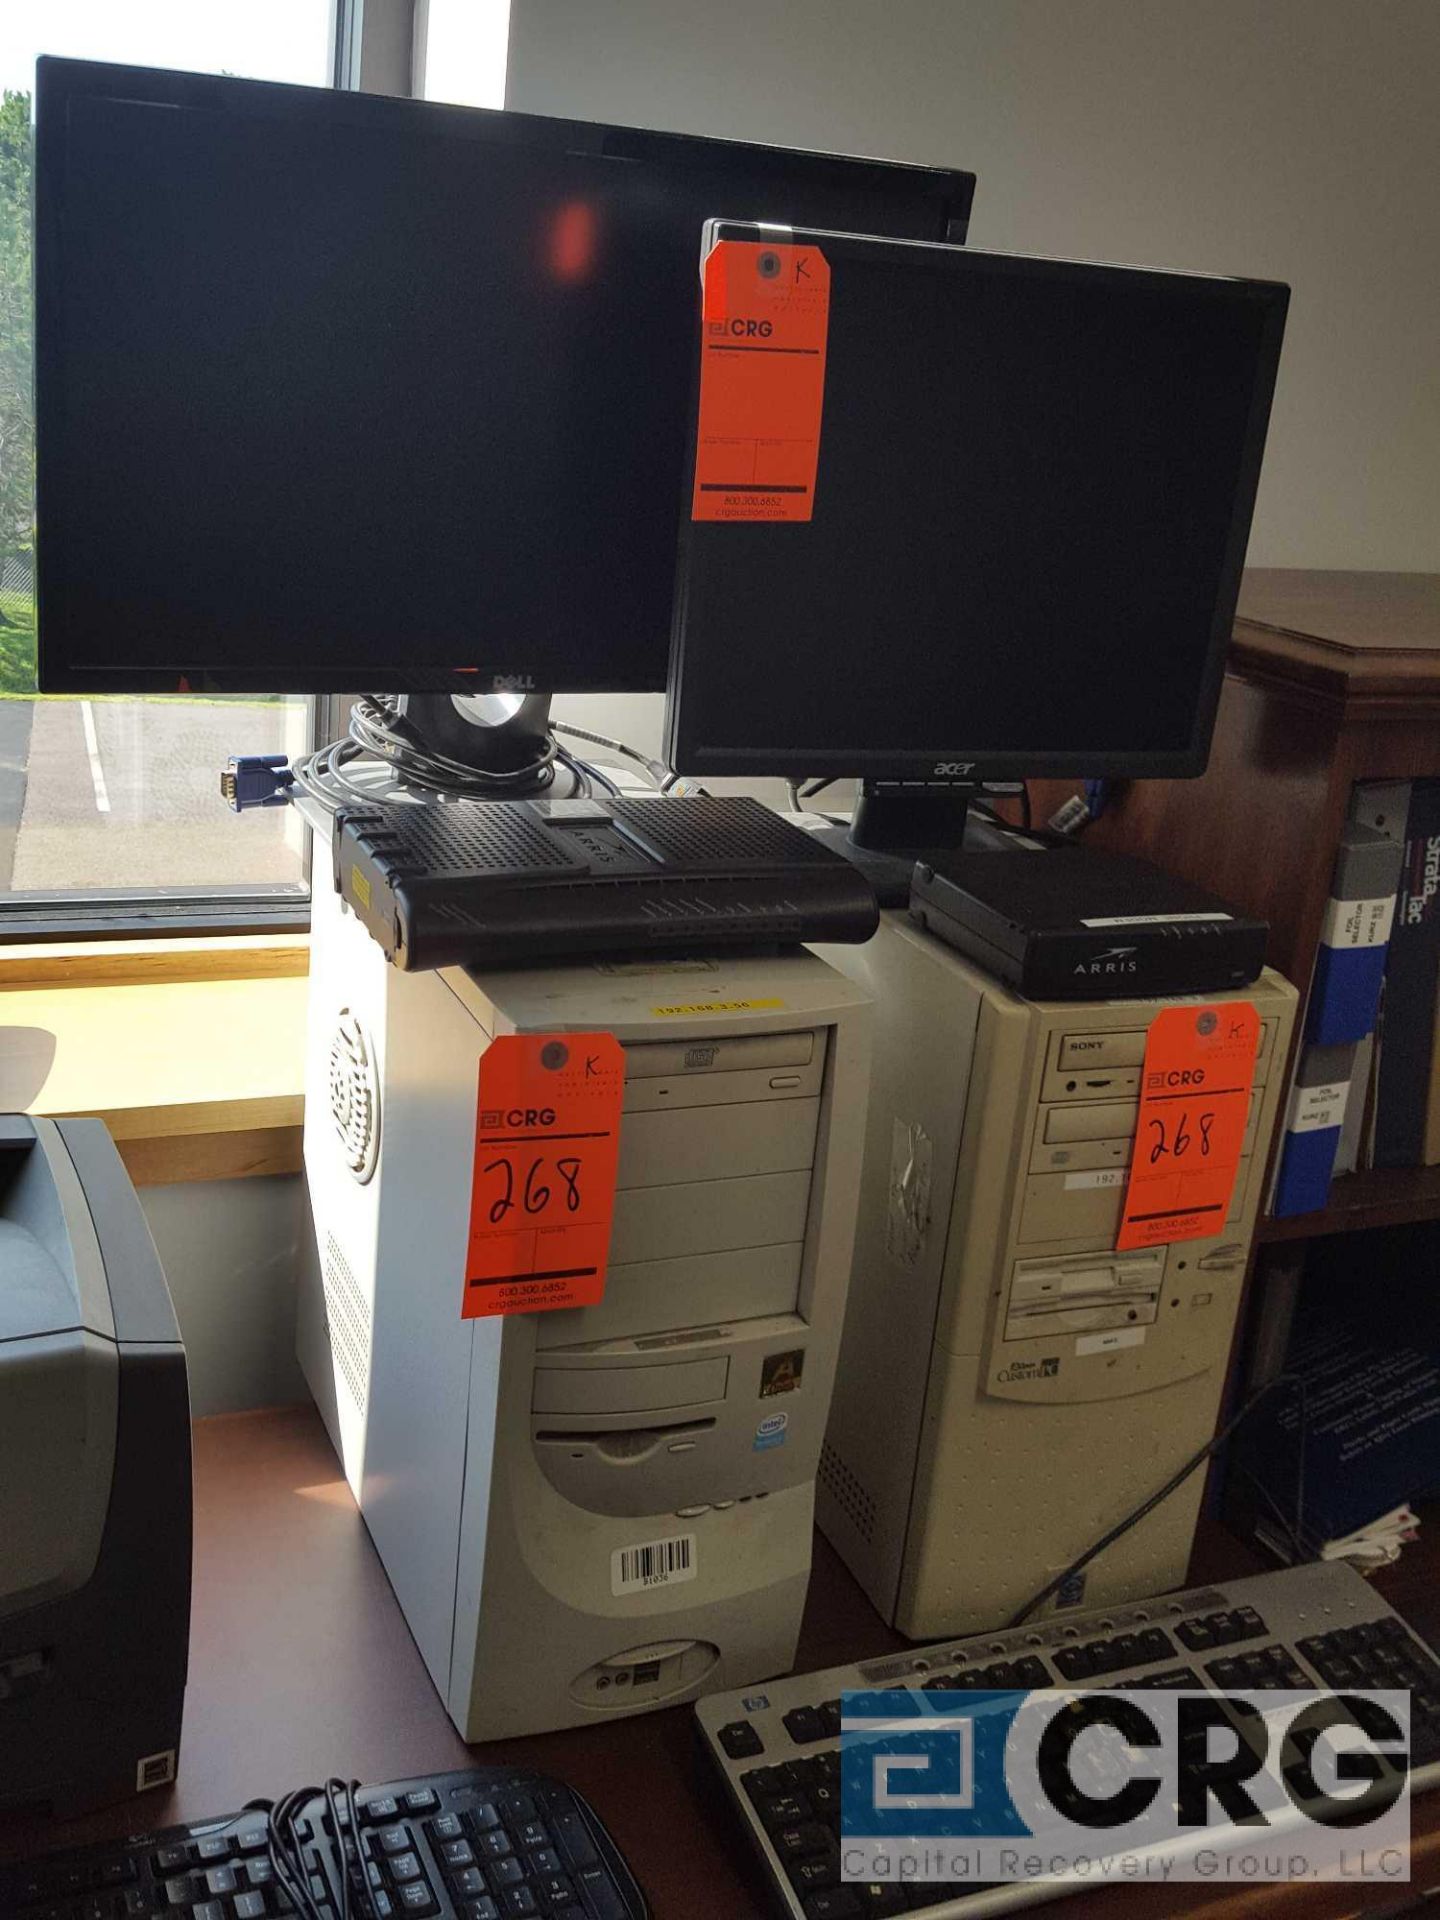 Lot of assorted computers, monitors, keyboards, printer, and accessories etc - Image 3 of 5